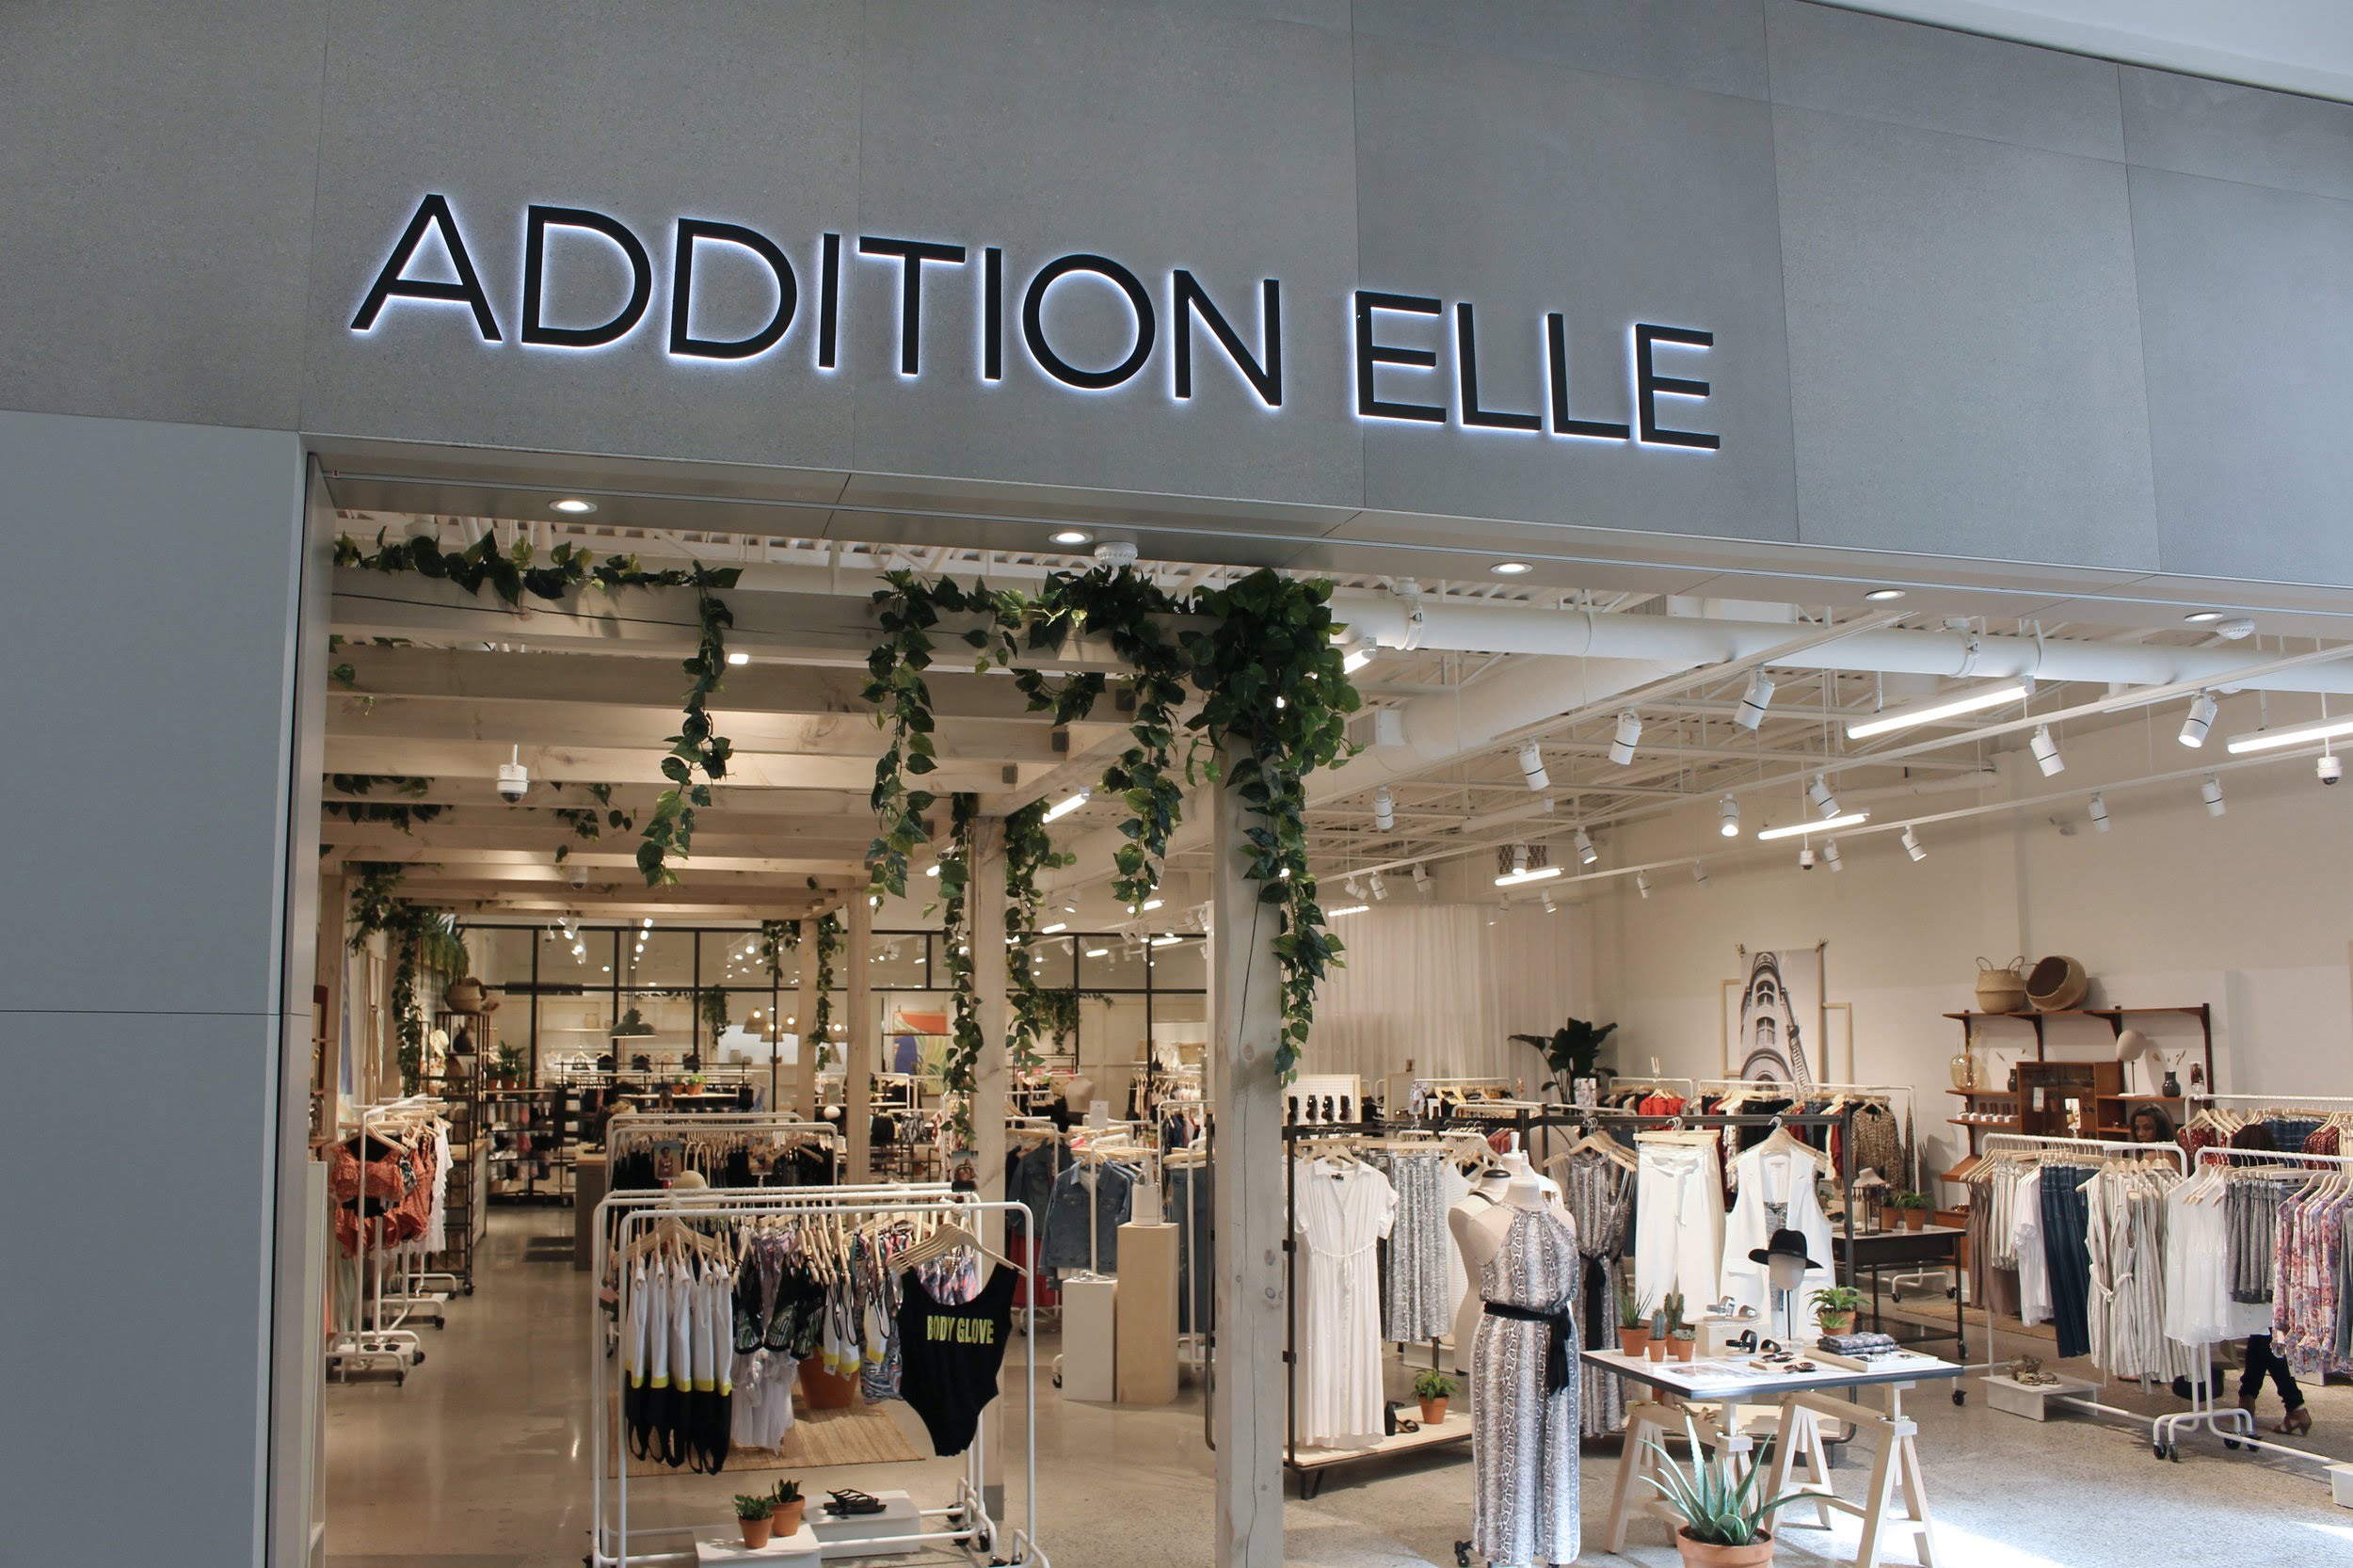 Addition Elle puts the fashion industry on notice » Strategy